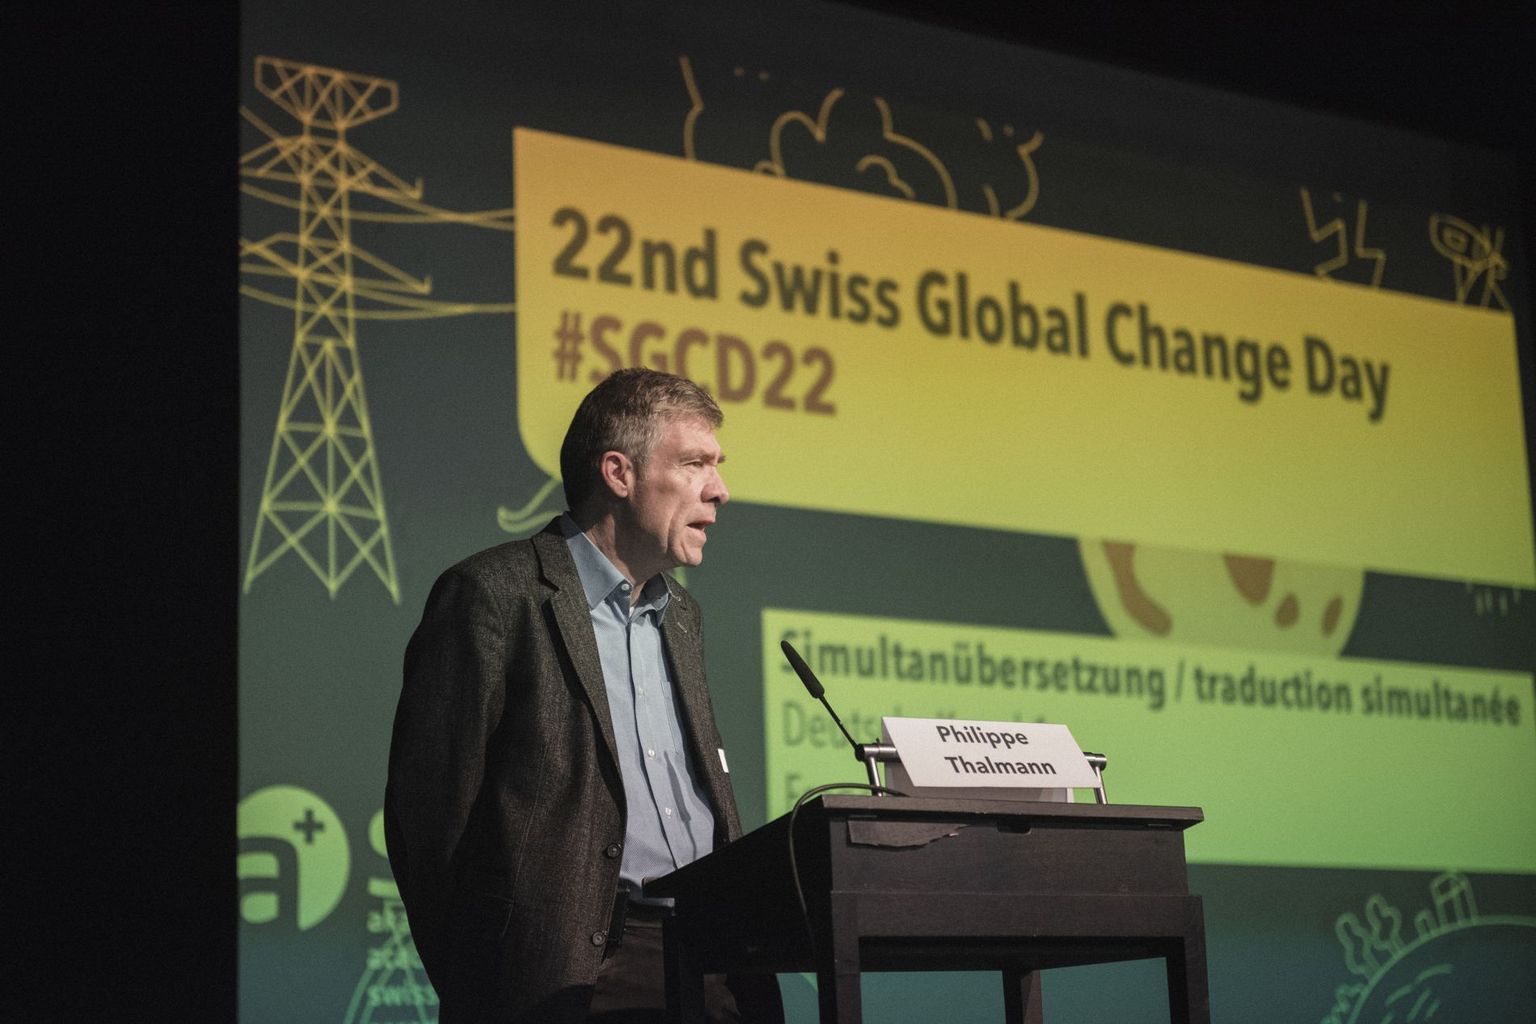 #SGCD22: Philippe Thalmann, President of ProClim, is inaugurating the 22nd Swiss Global Change Day